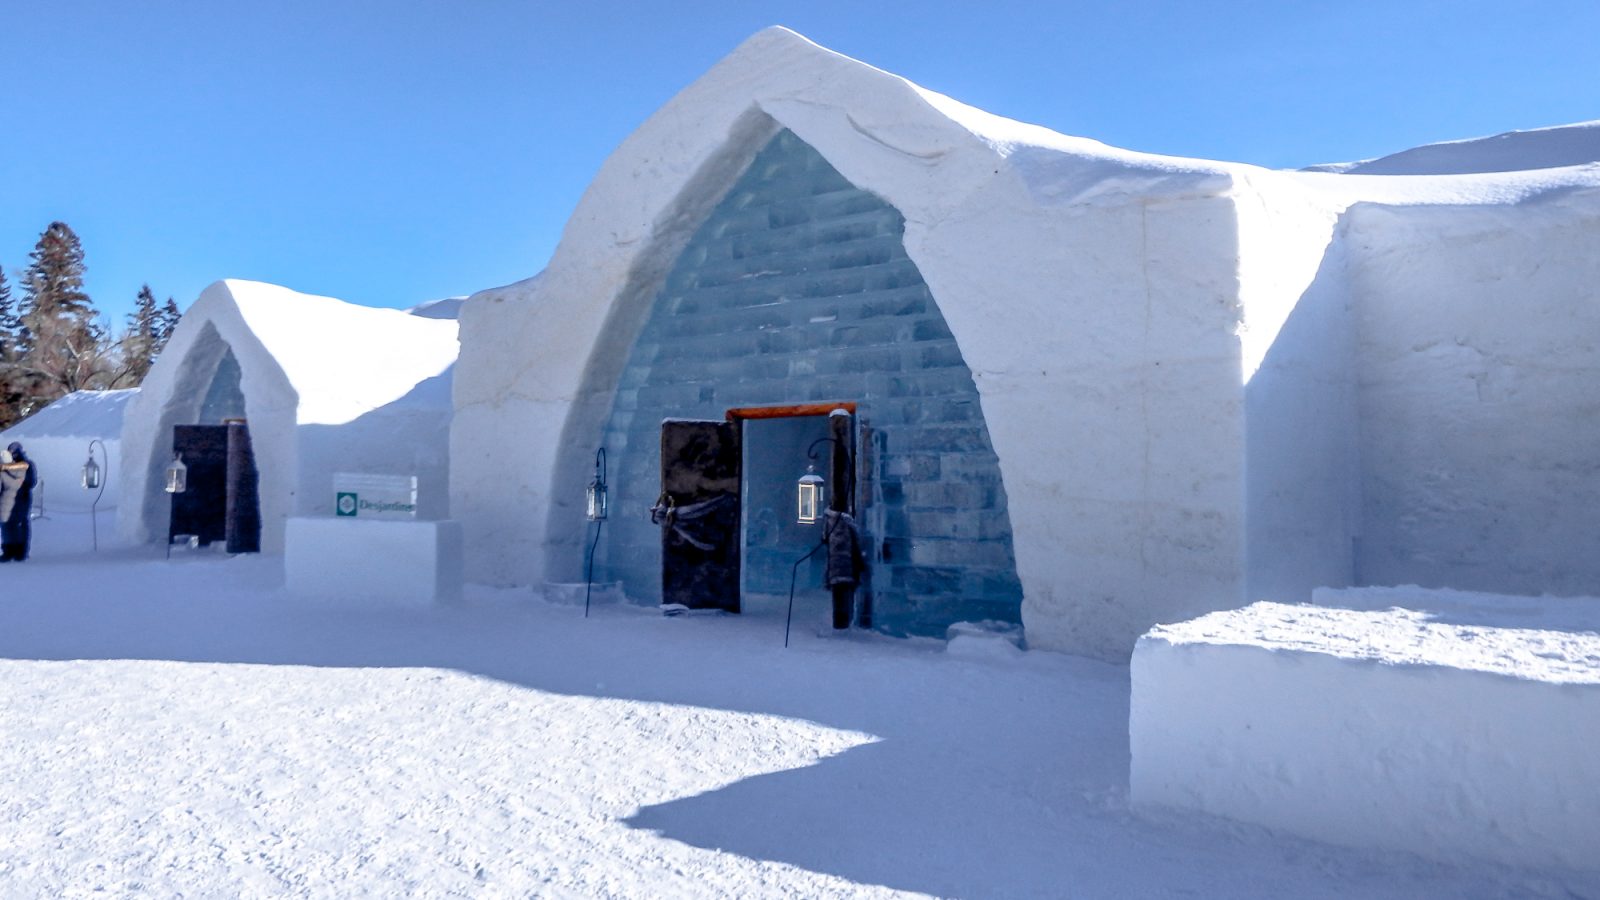 Spending a day at Hotel de Glace, Quebec City, Ice Hotel | Canada | Snow hotel | Ice Bar | Polar Bear suite | Nordic spa | Ice slides | Winter fun |